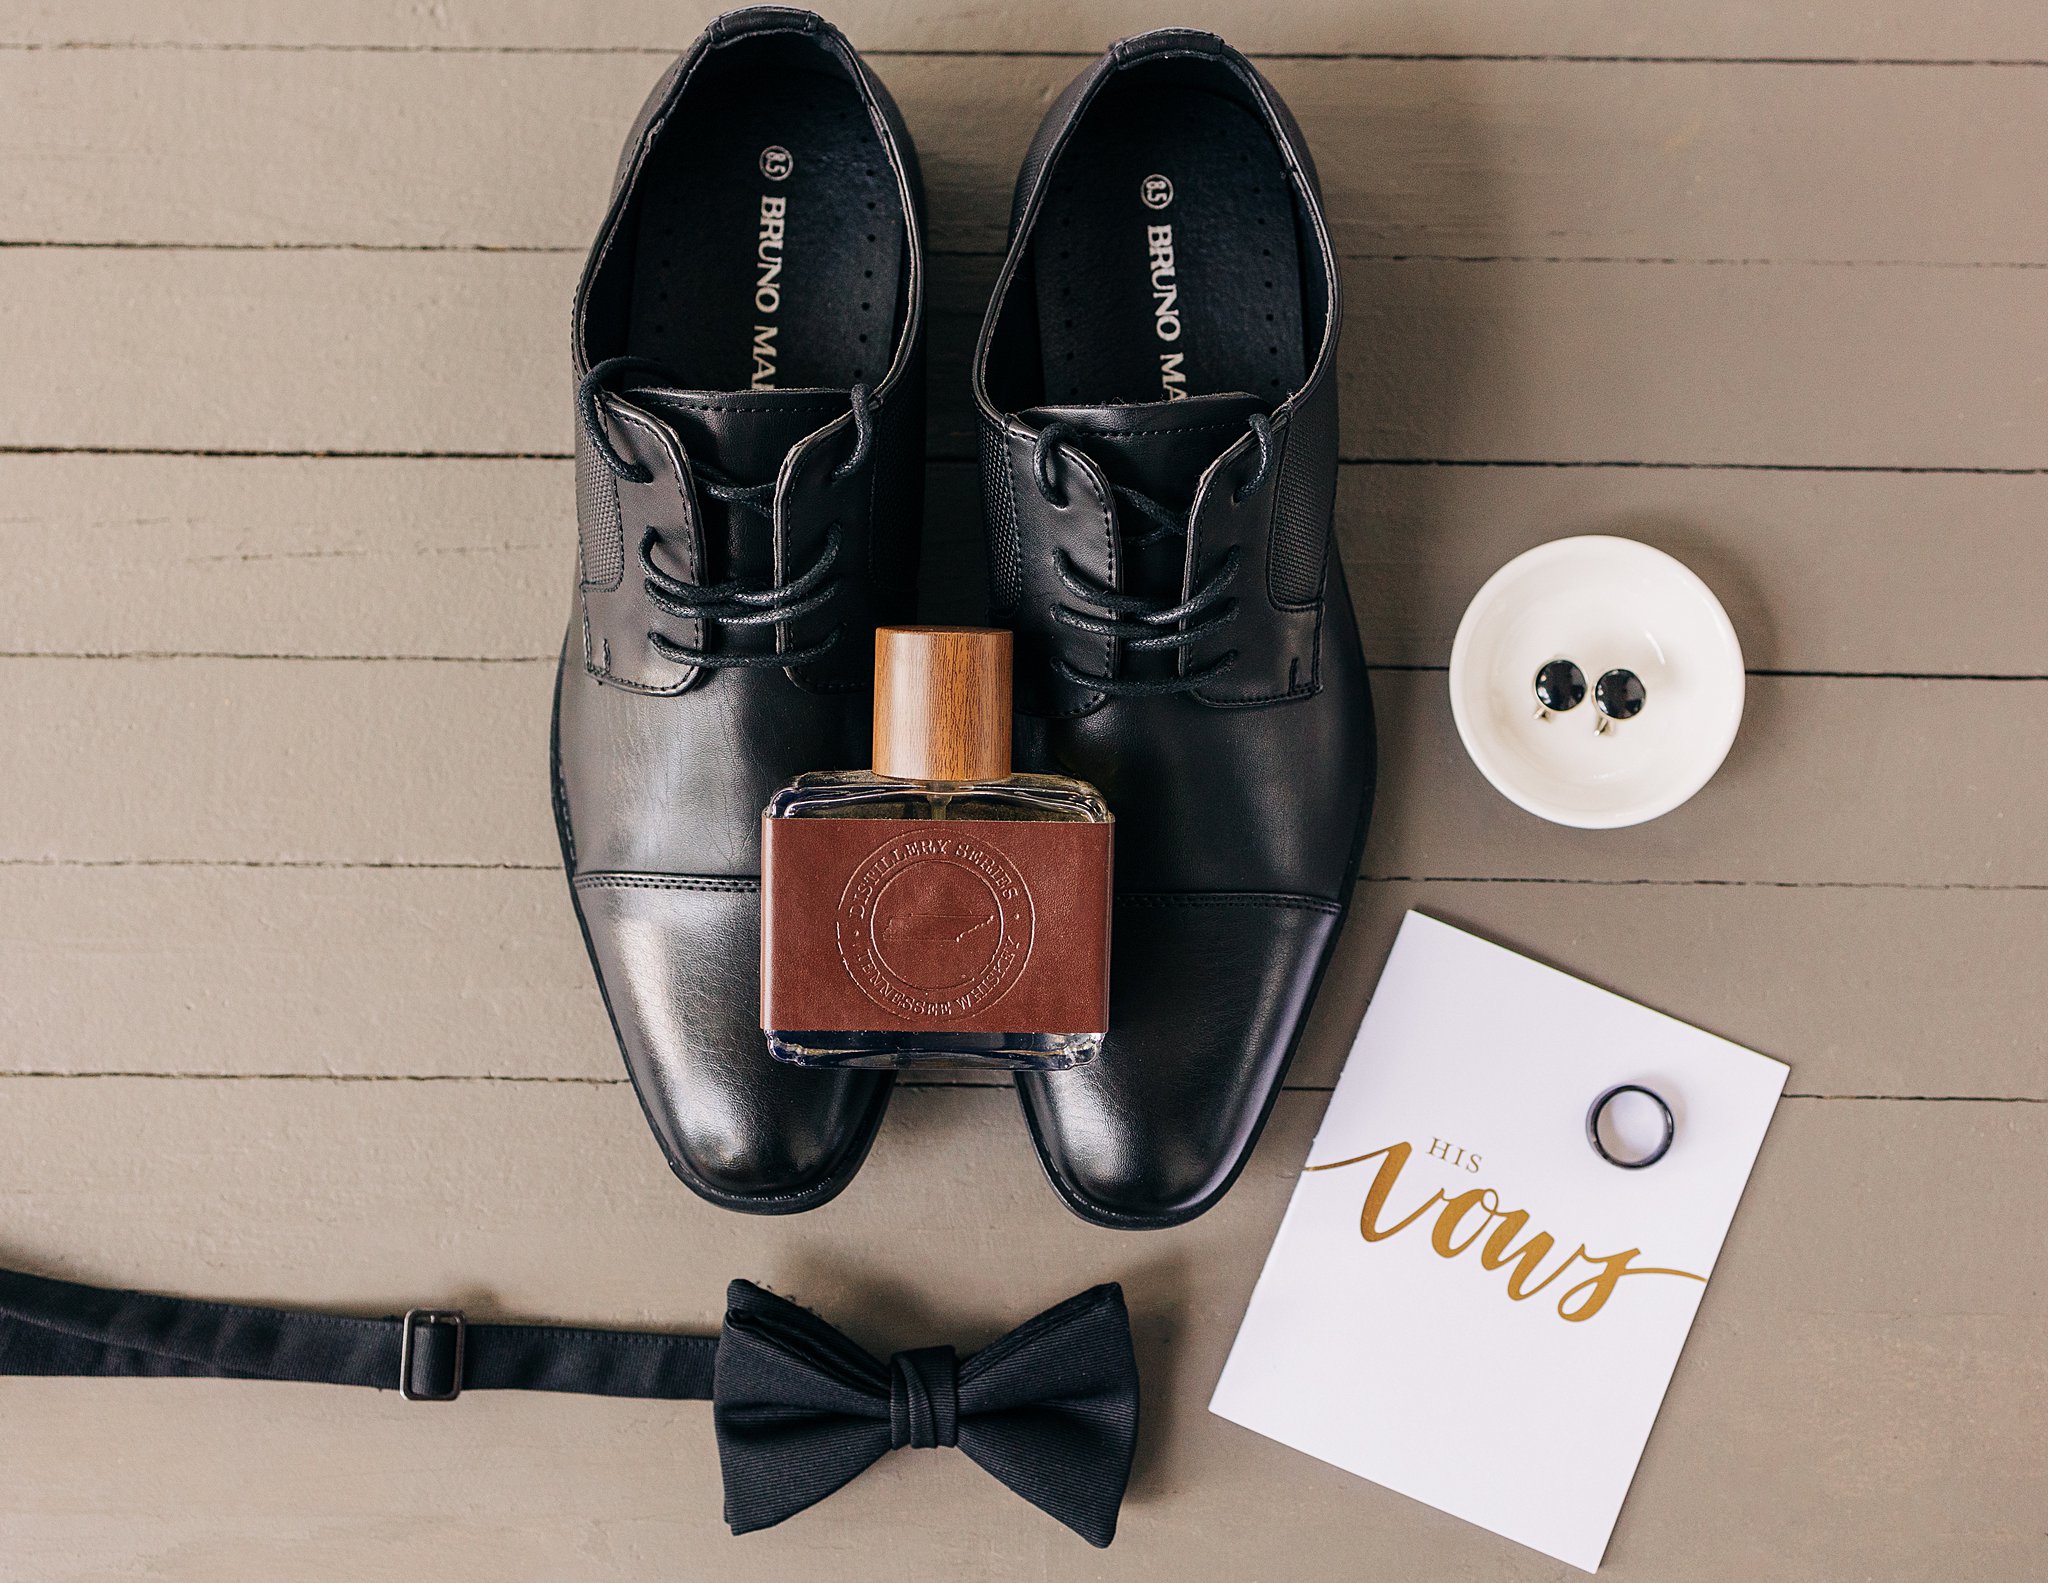 Groom details on a wooden floor with black shoes, cologne, bowtie and vows